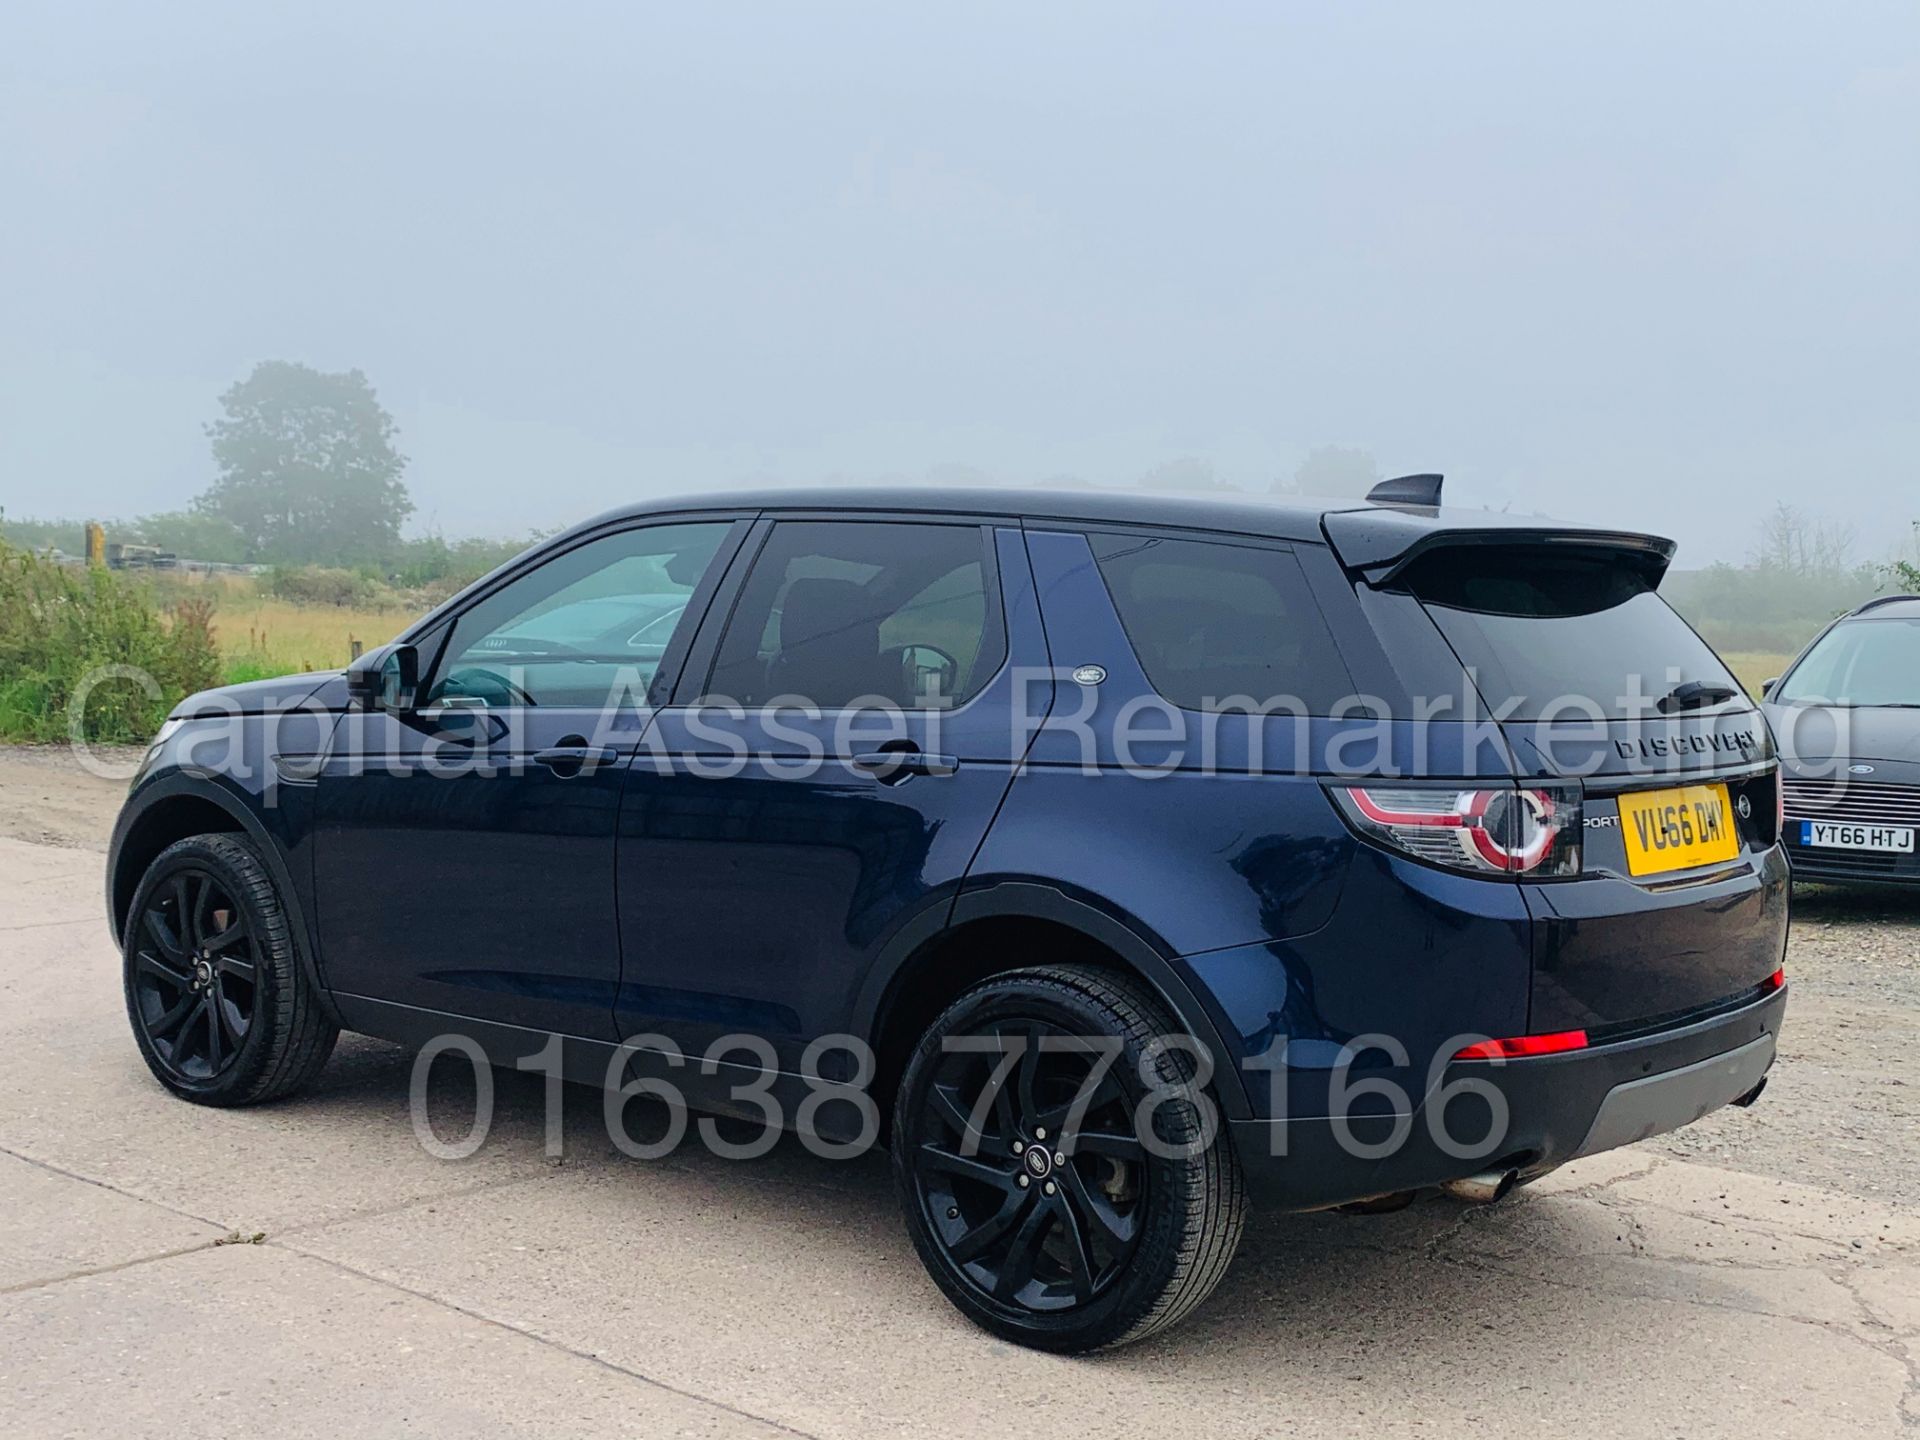 LAND ROVER DISCOVERY SPORT *HSE BLACK EDITION* SUV (2017 MODEL) '2.0 TD4 - AUTO' **MASSIVE SPEC** - Image 9 of 59